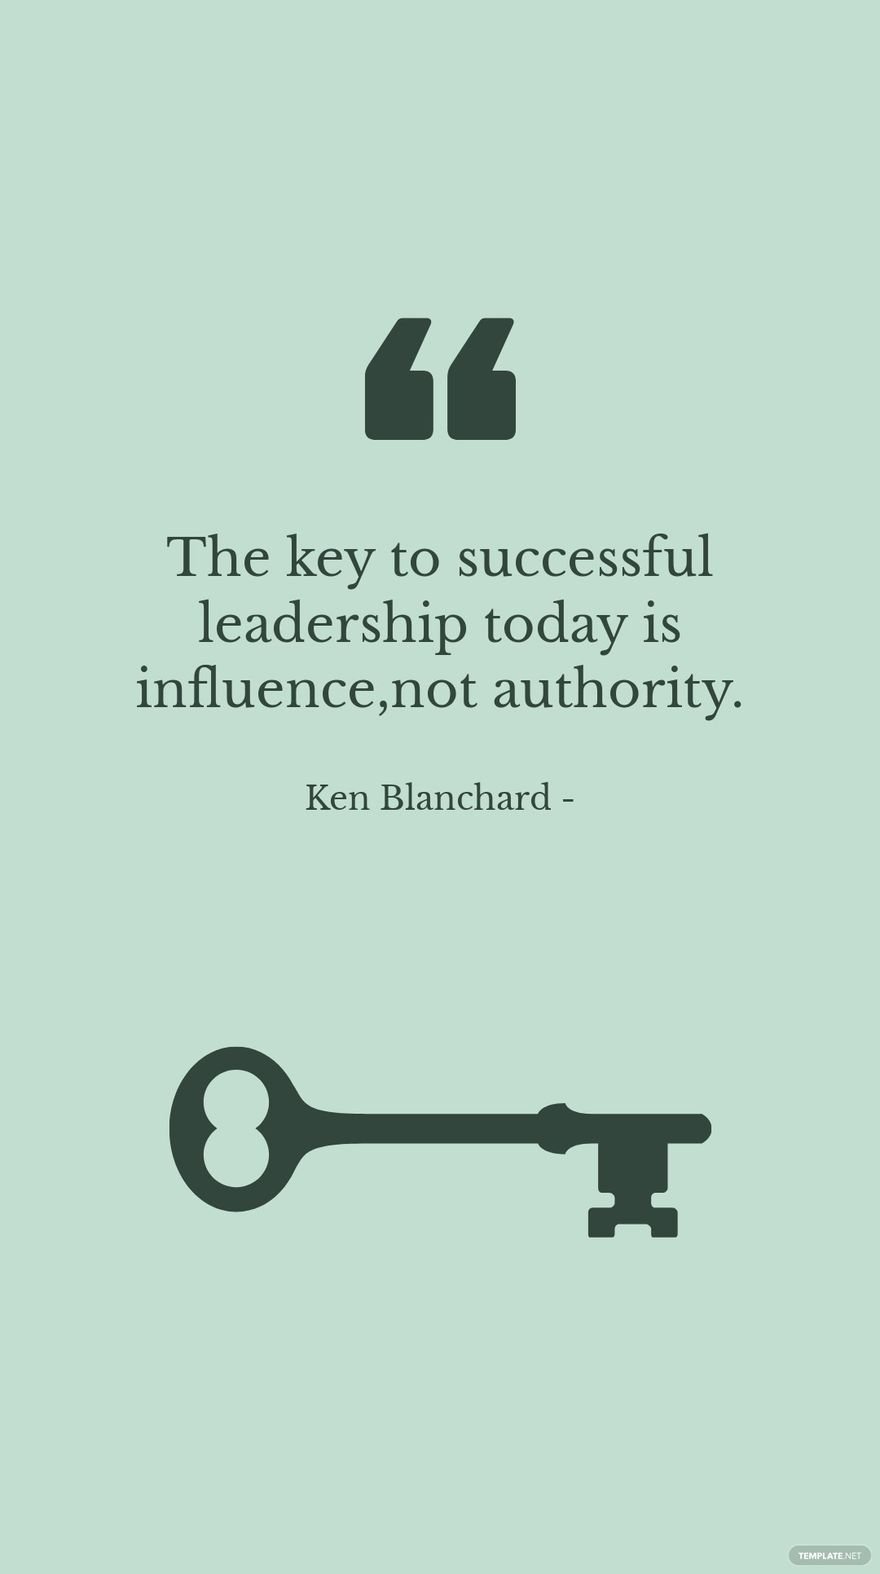 Ken Blanchard - The key to successful leadership today is influence, not authority.